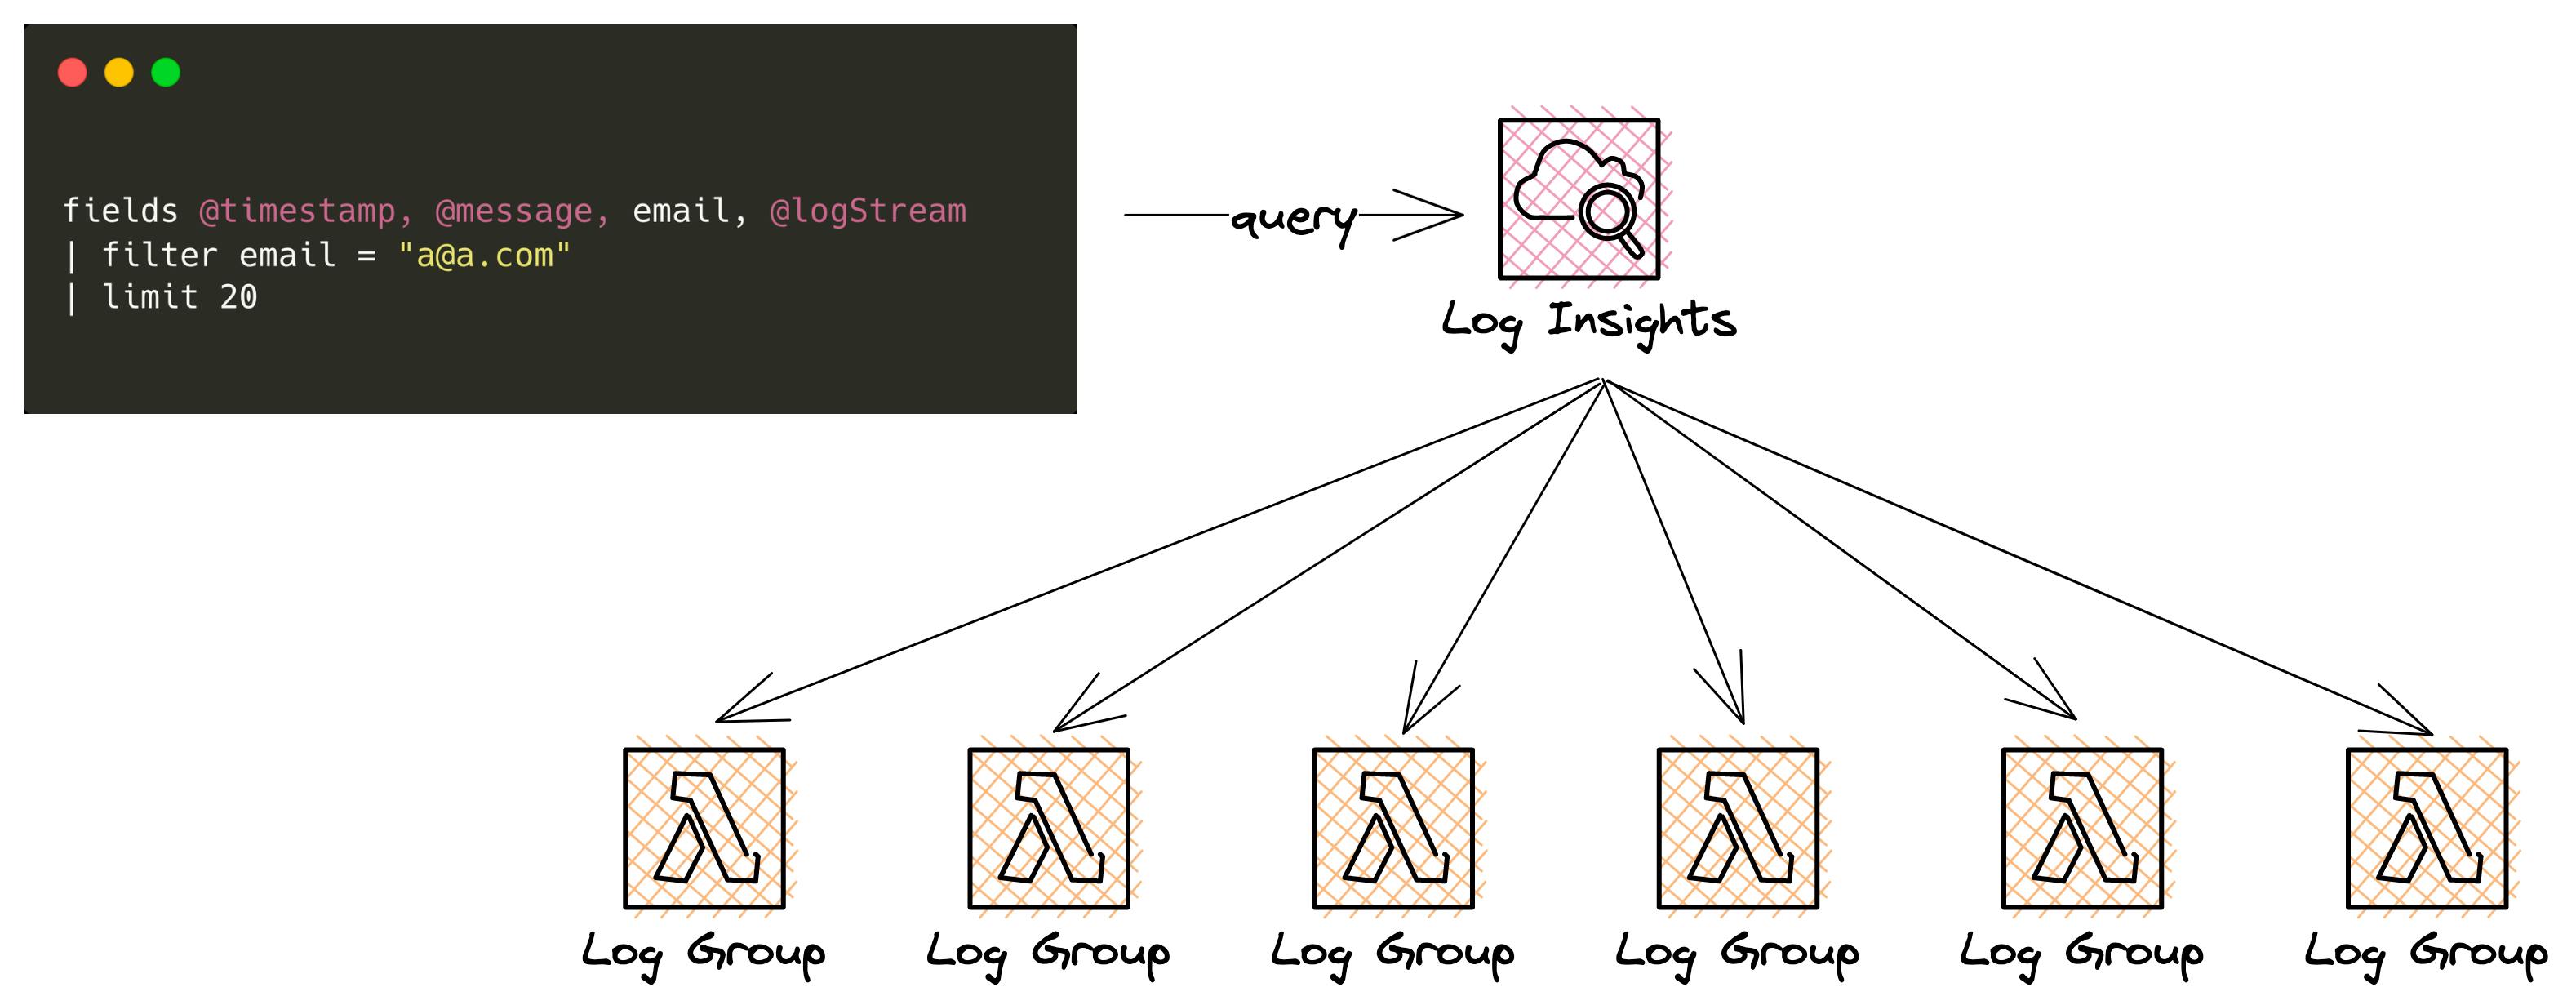 CloudWatch Insights queries multiple log groups